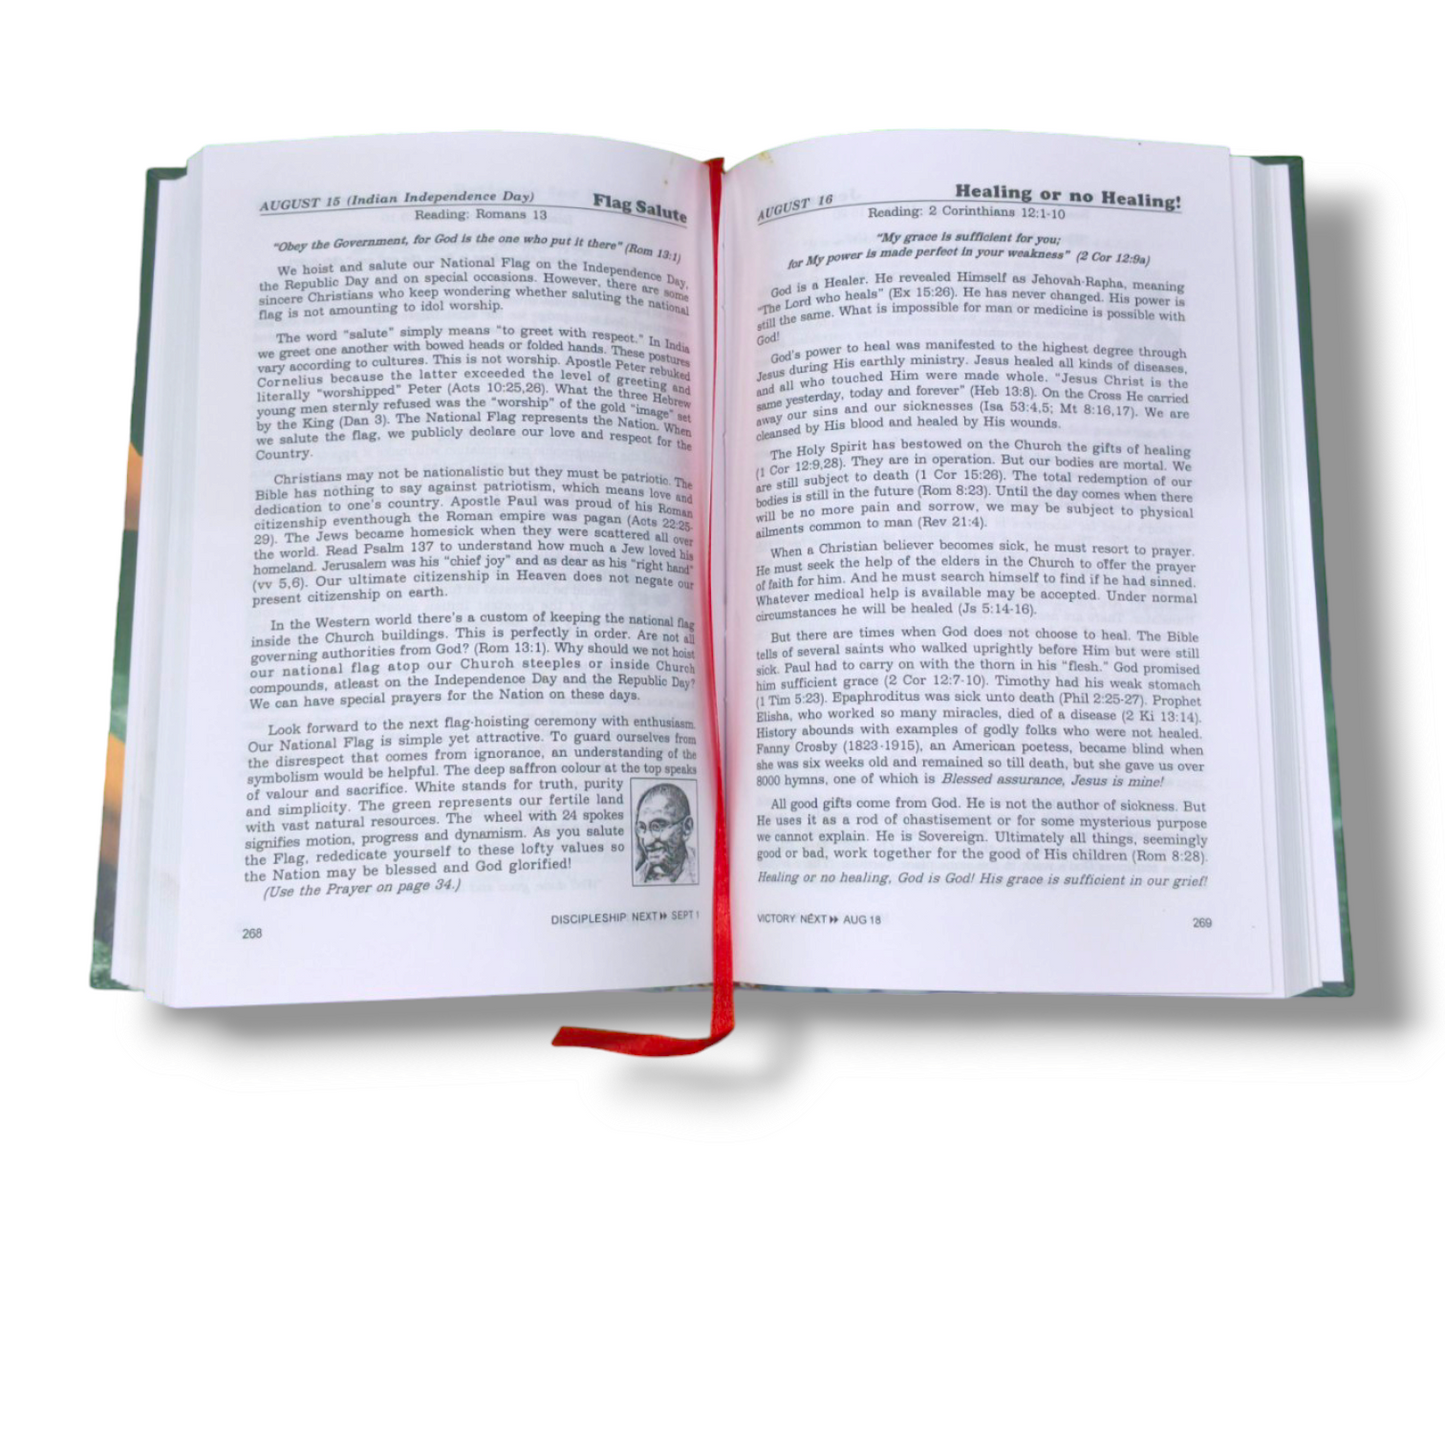 Better Everyday Daily Meditations | Christian Gospel Book | In English Version | Paper Bound | New Edition